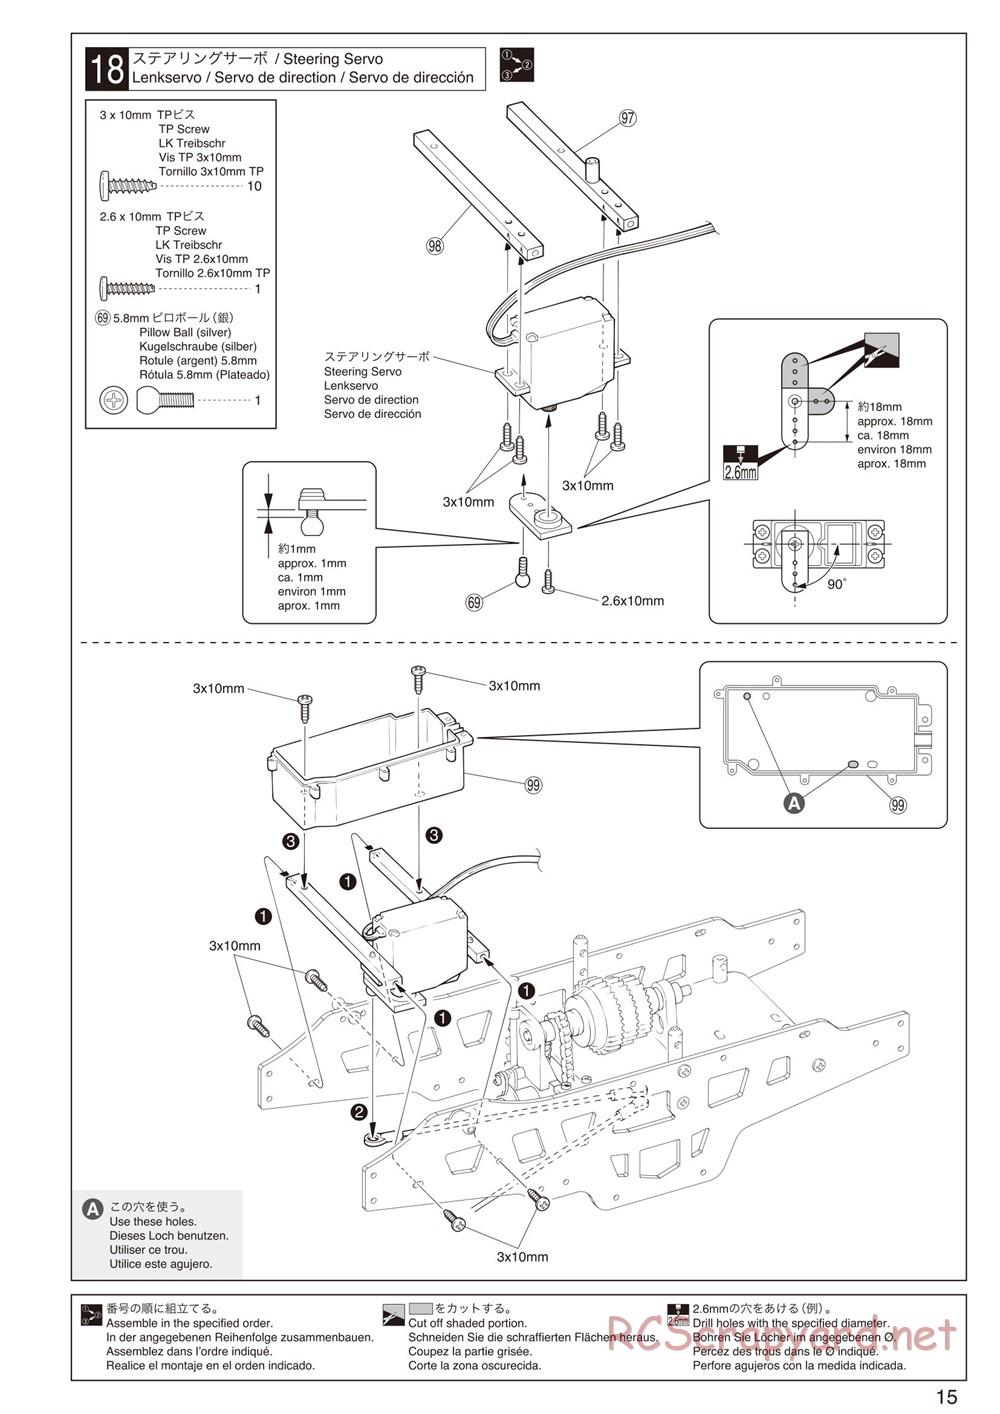 Kyosho - Mad Force Cruiser - Manual - Page 15